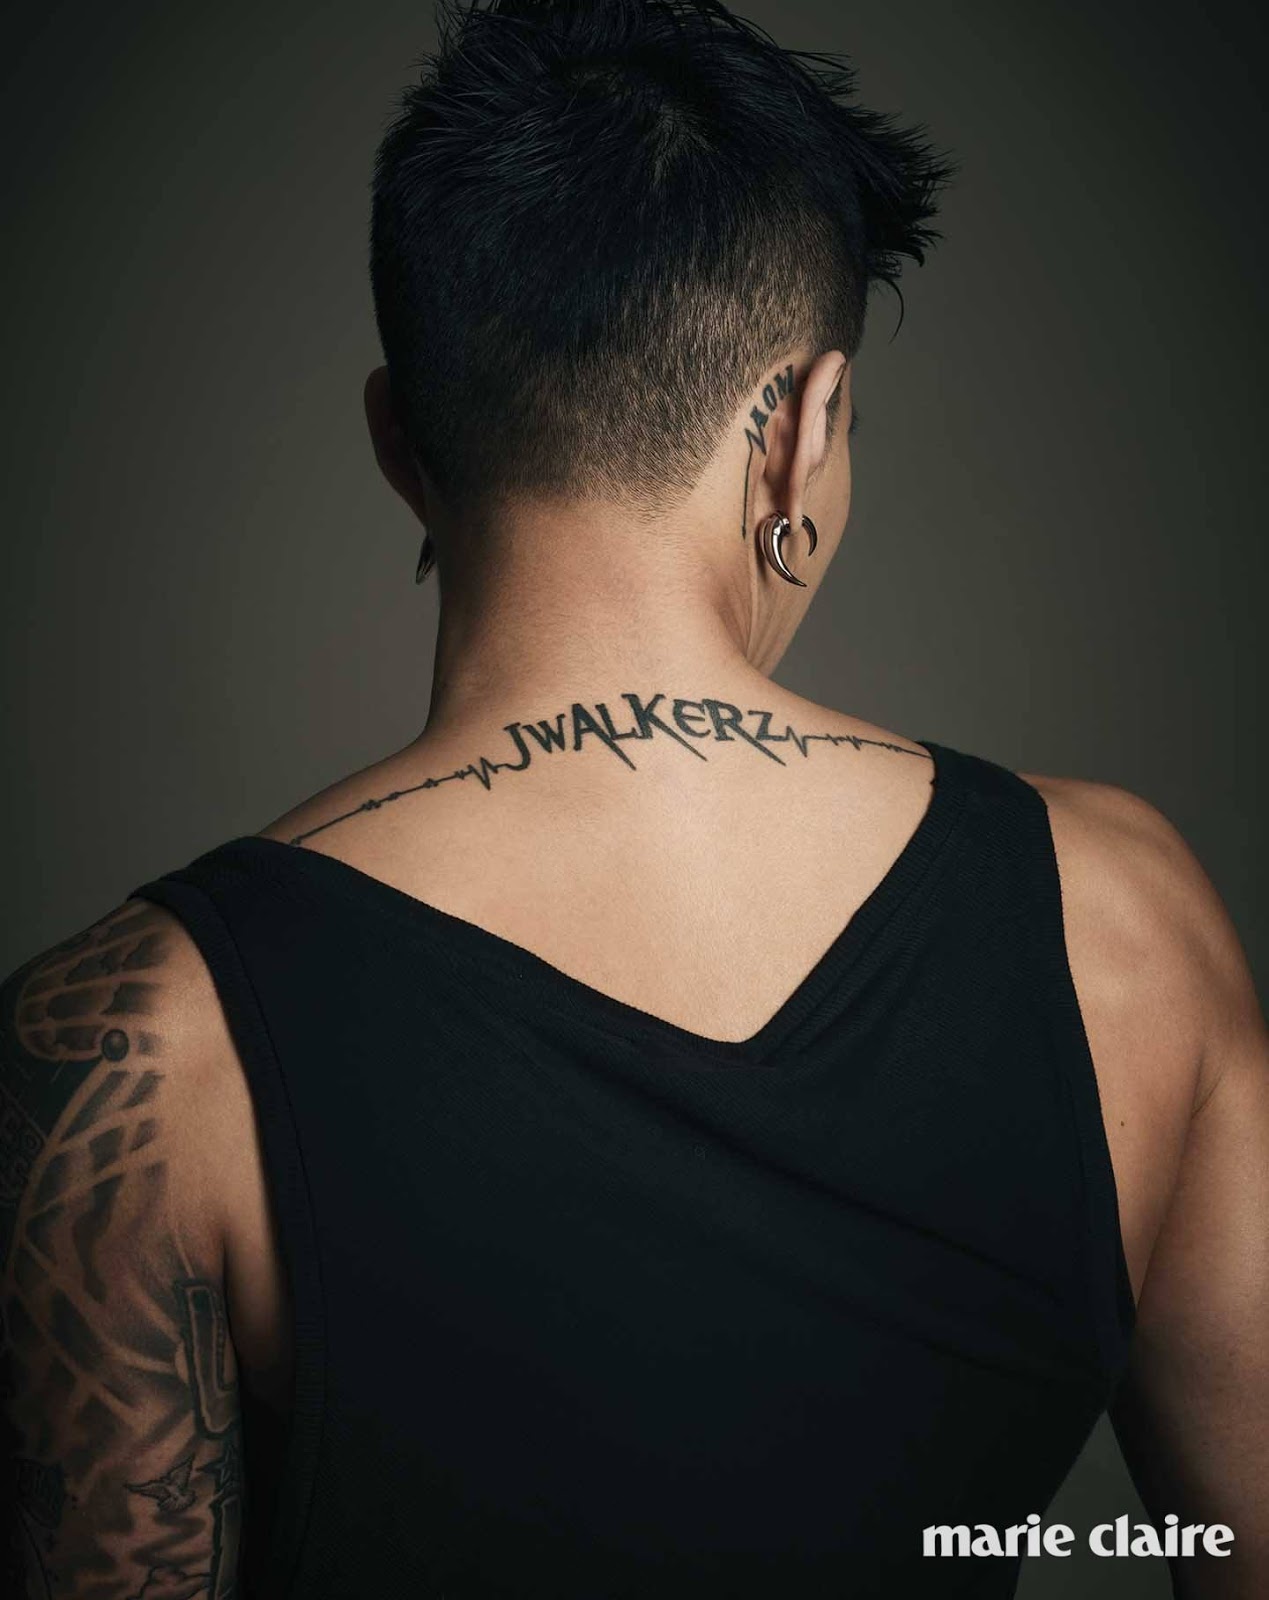 Six Kpop Idol who made the Tattoos to Dedicated for Fans ...